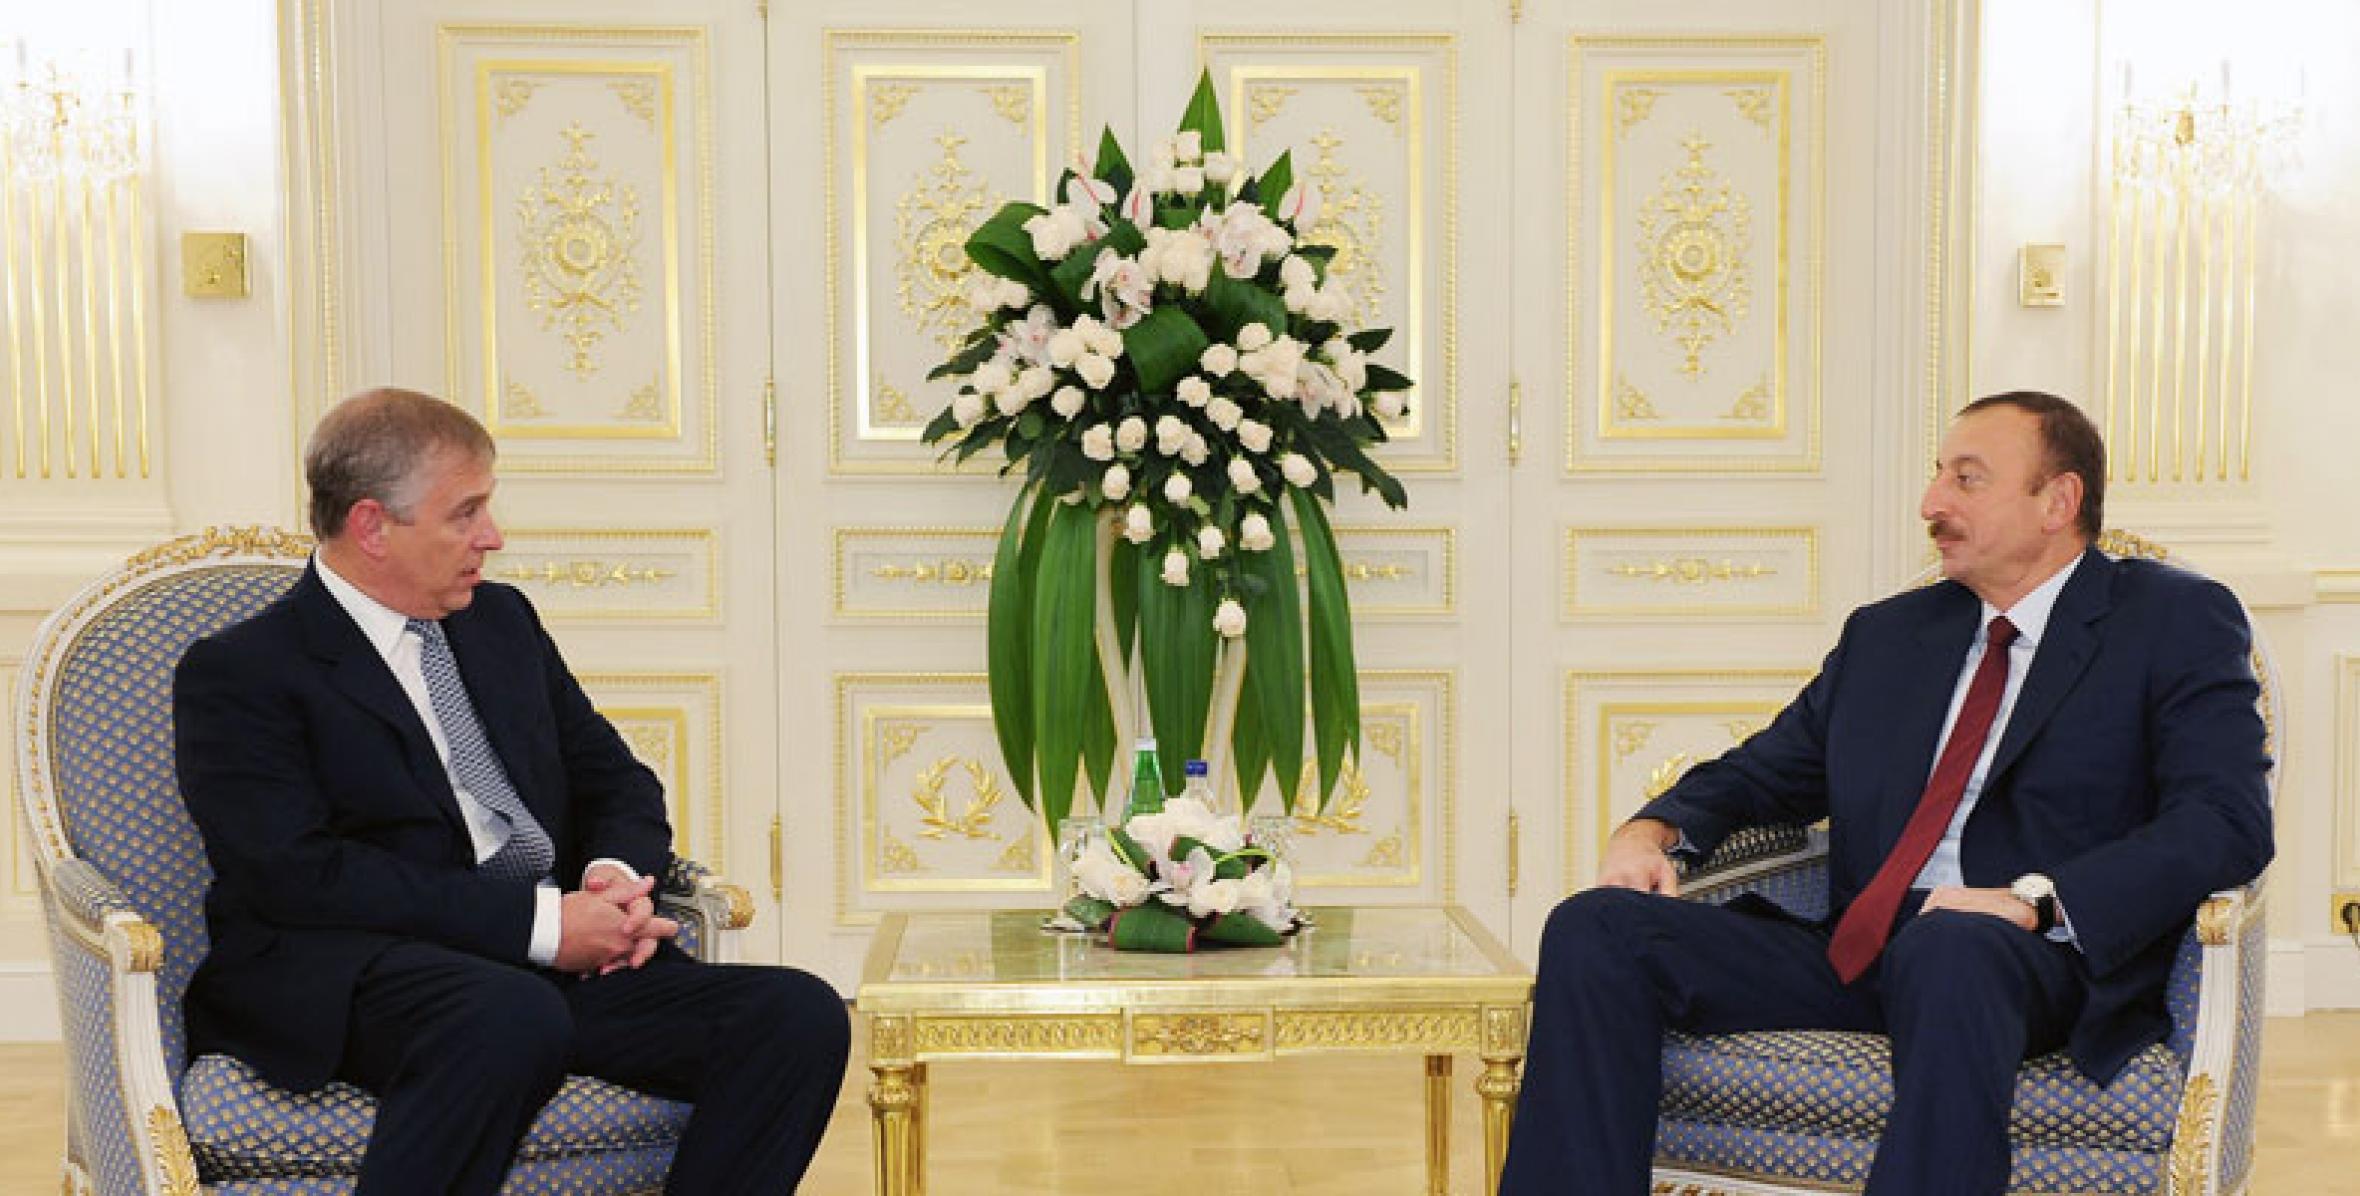 Ilham Aliyev received Duke of York of the Great Britain, Prince Andrew